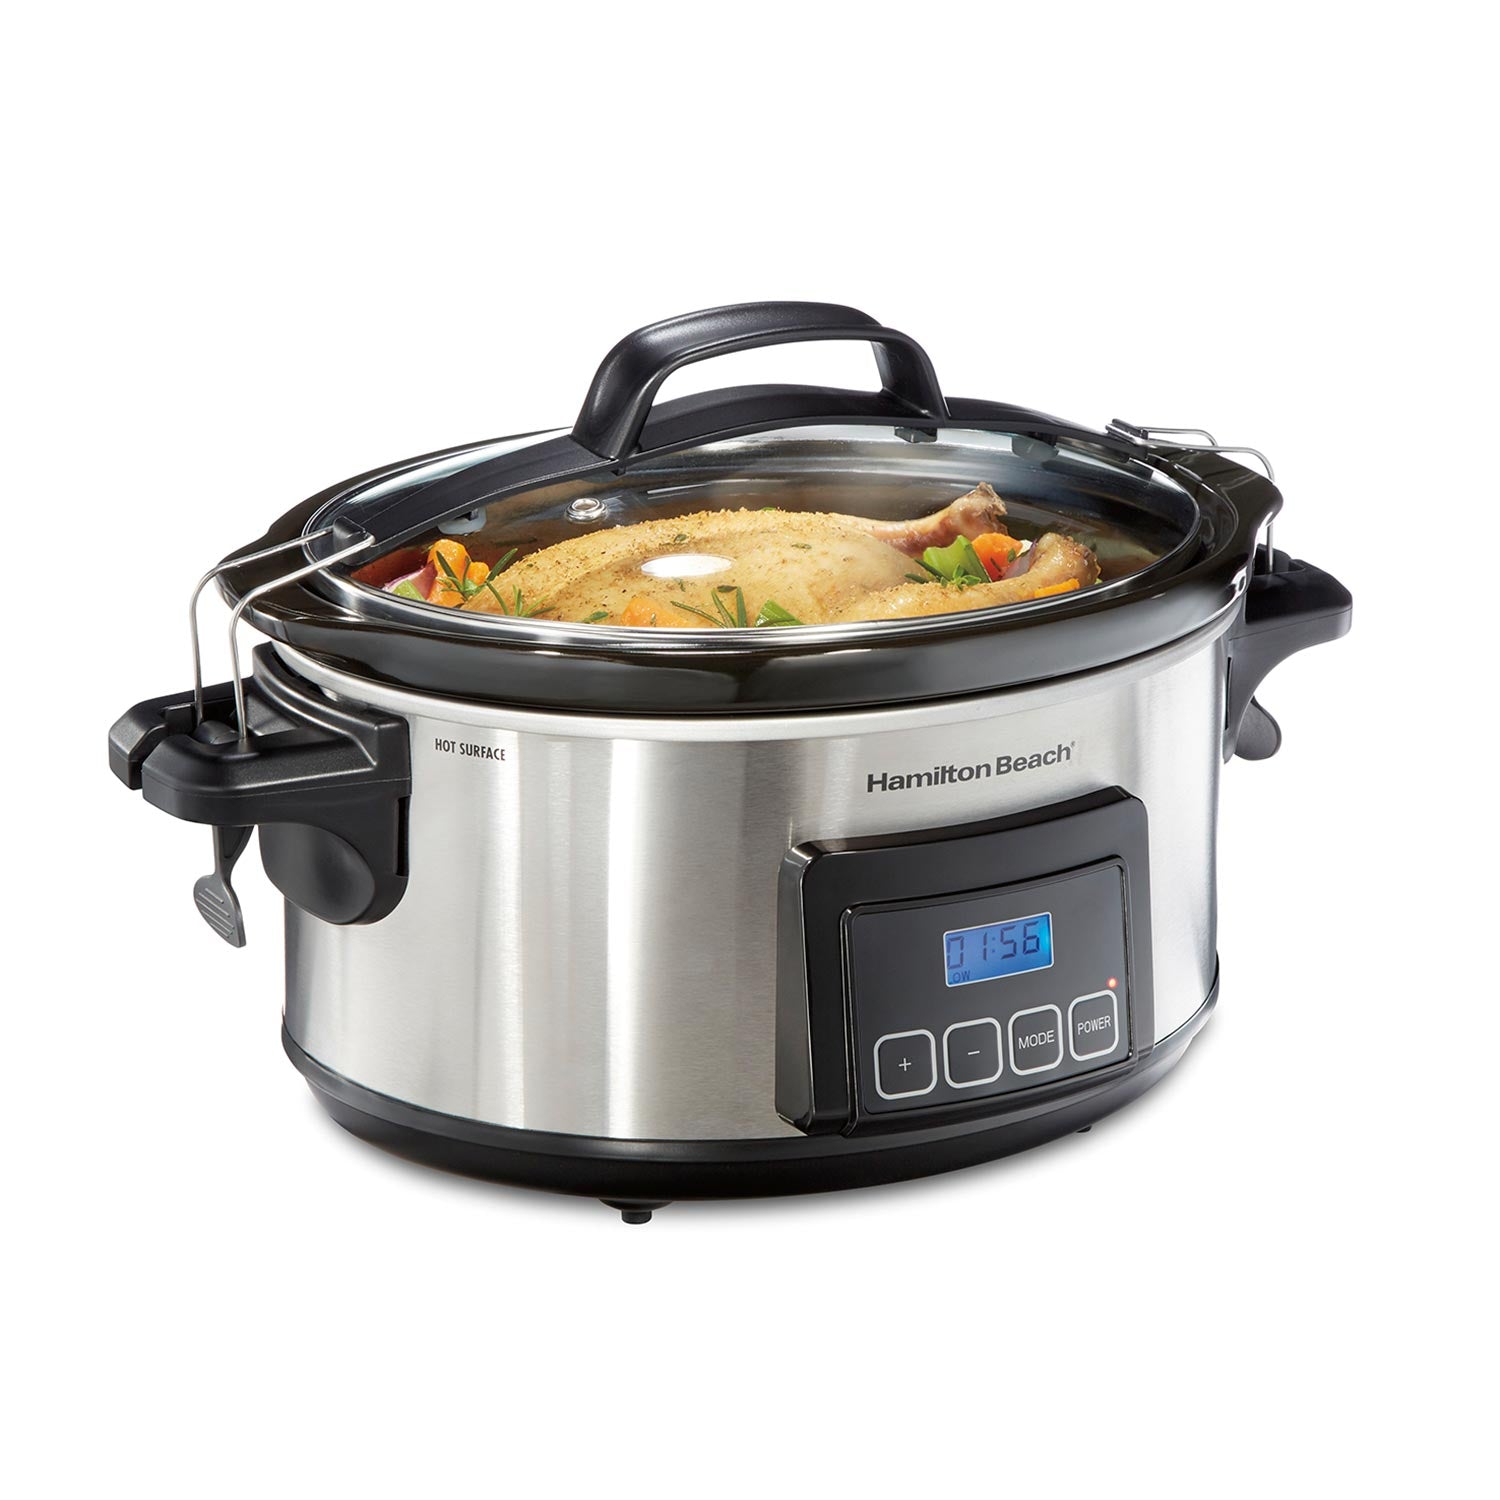 Hamilton Beach 6-Quart Black Oval Slow Cooker with Handles, Stay